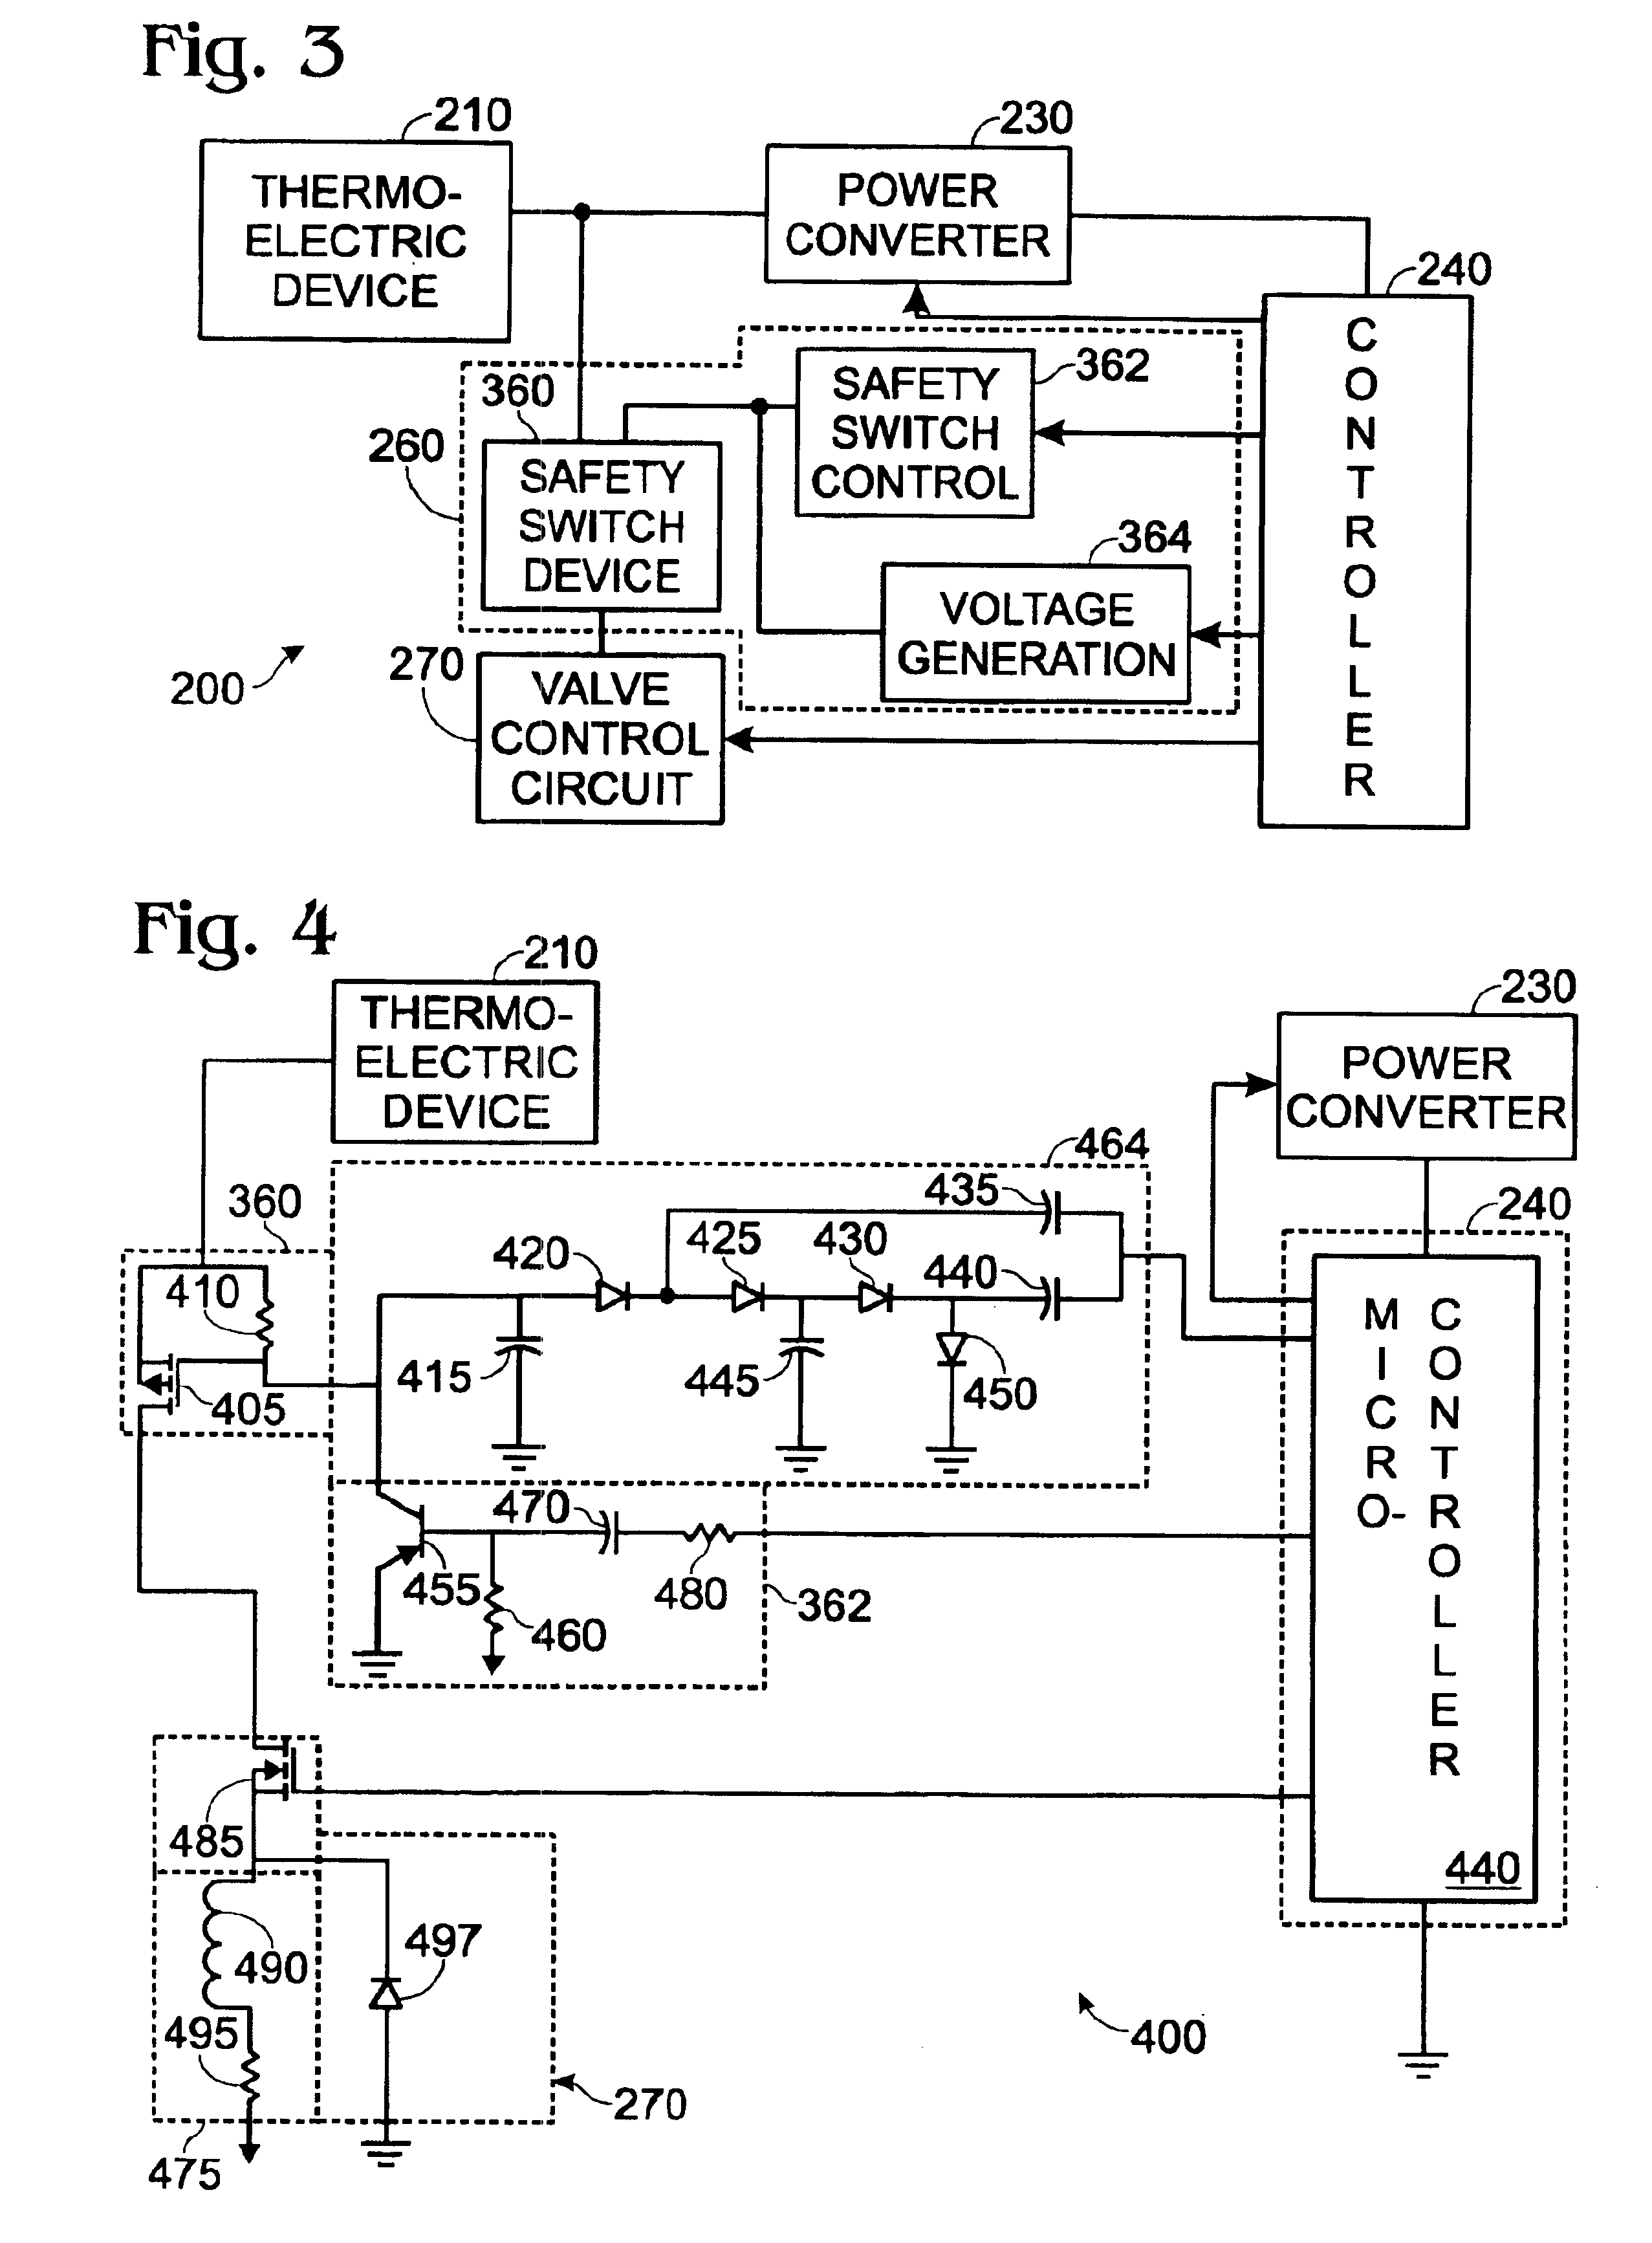 Method and apparatus for safety switch